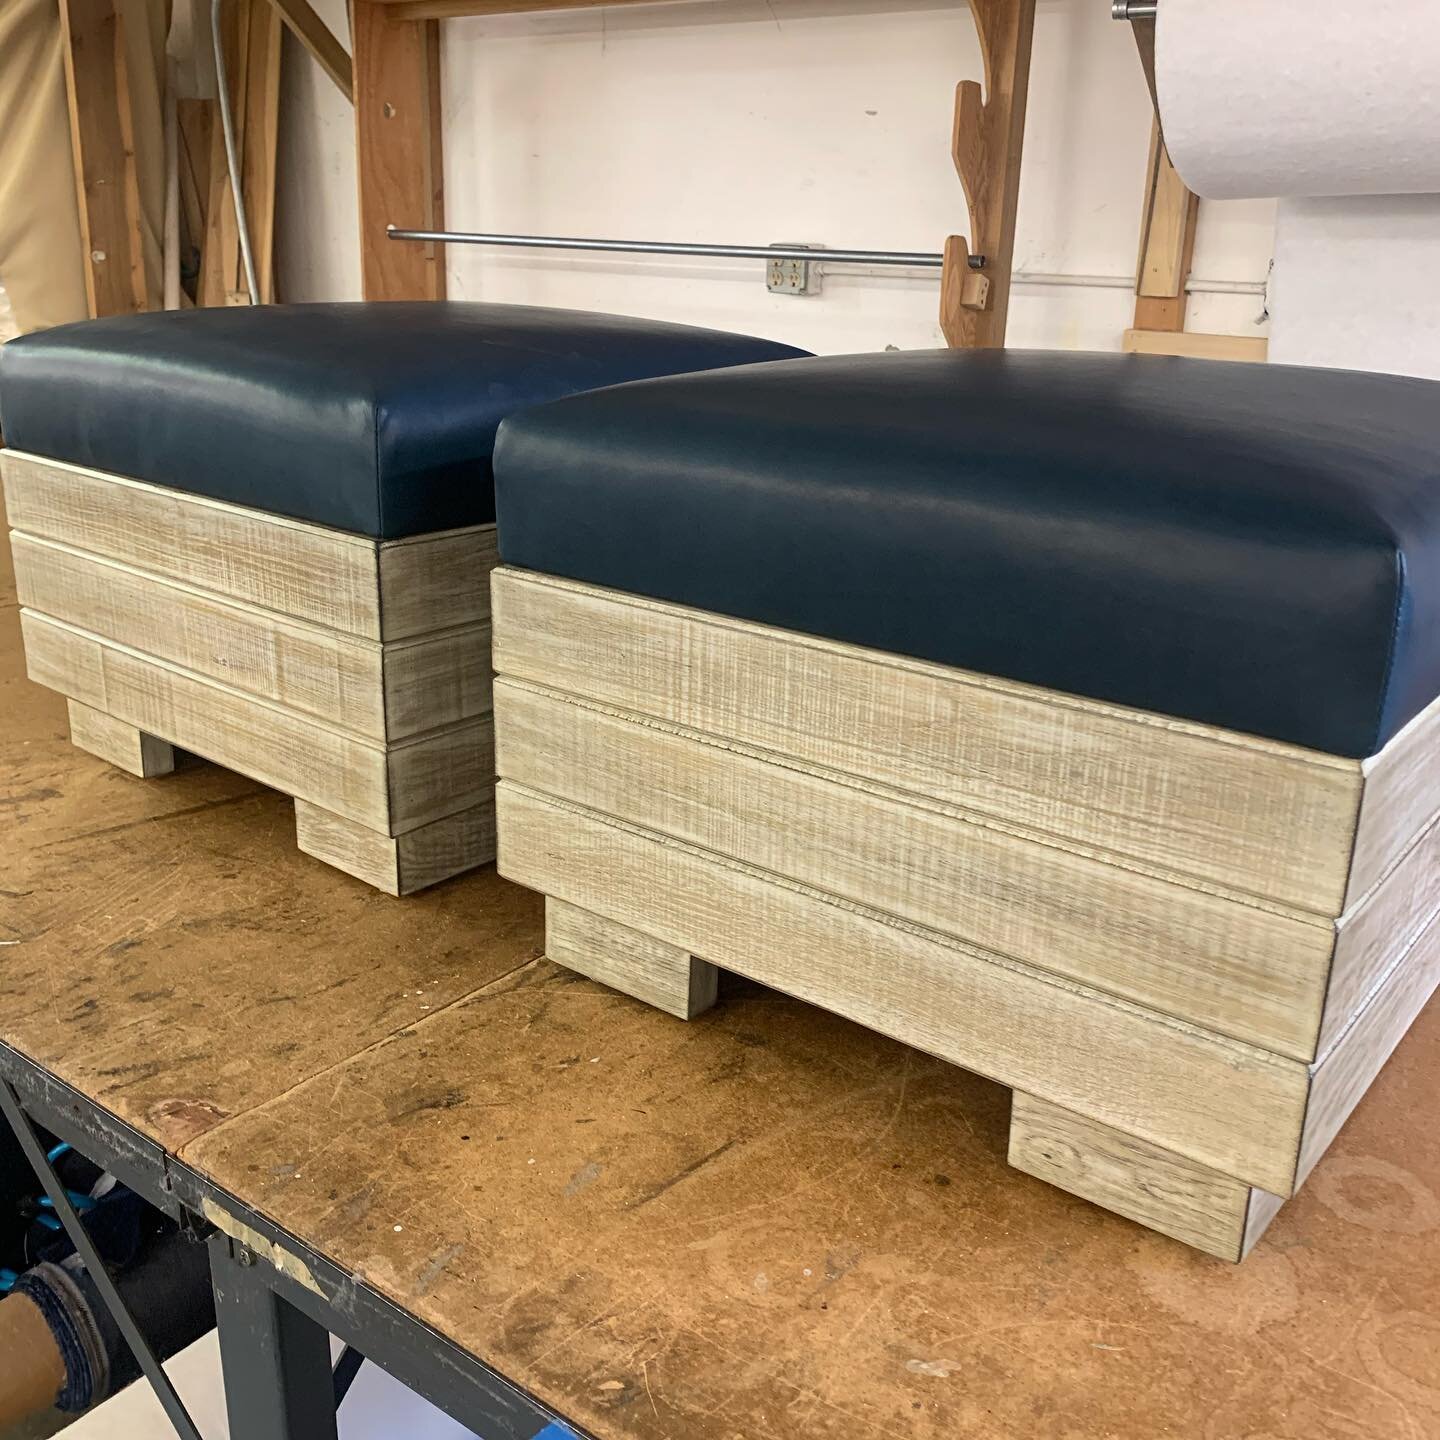 White oak ottomans ready for their new home all the to New Hamshire.  Safe travels my friends  #customupholstery #luxuryfurniture #customfurniture #newportbeach #interiordesign#customottomans